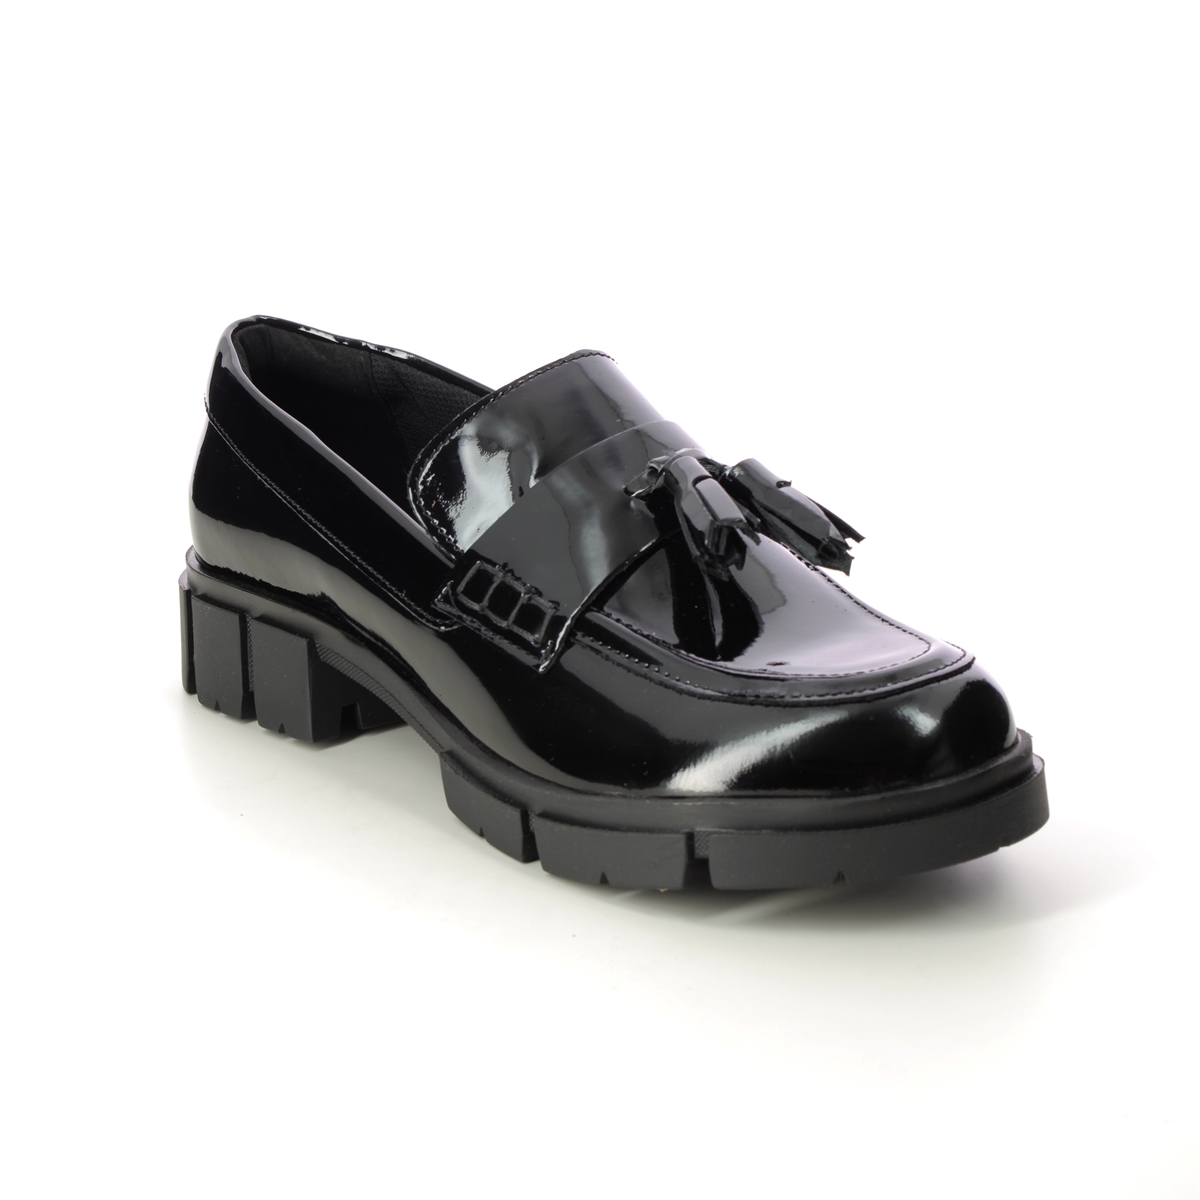 Clarks Teala Loafer Black Patent Womens Loafers 689984D In Size 5.5 In Plain Black Patent